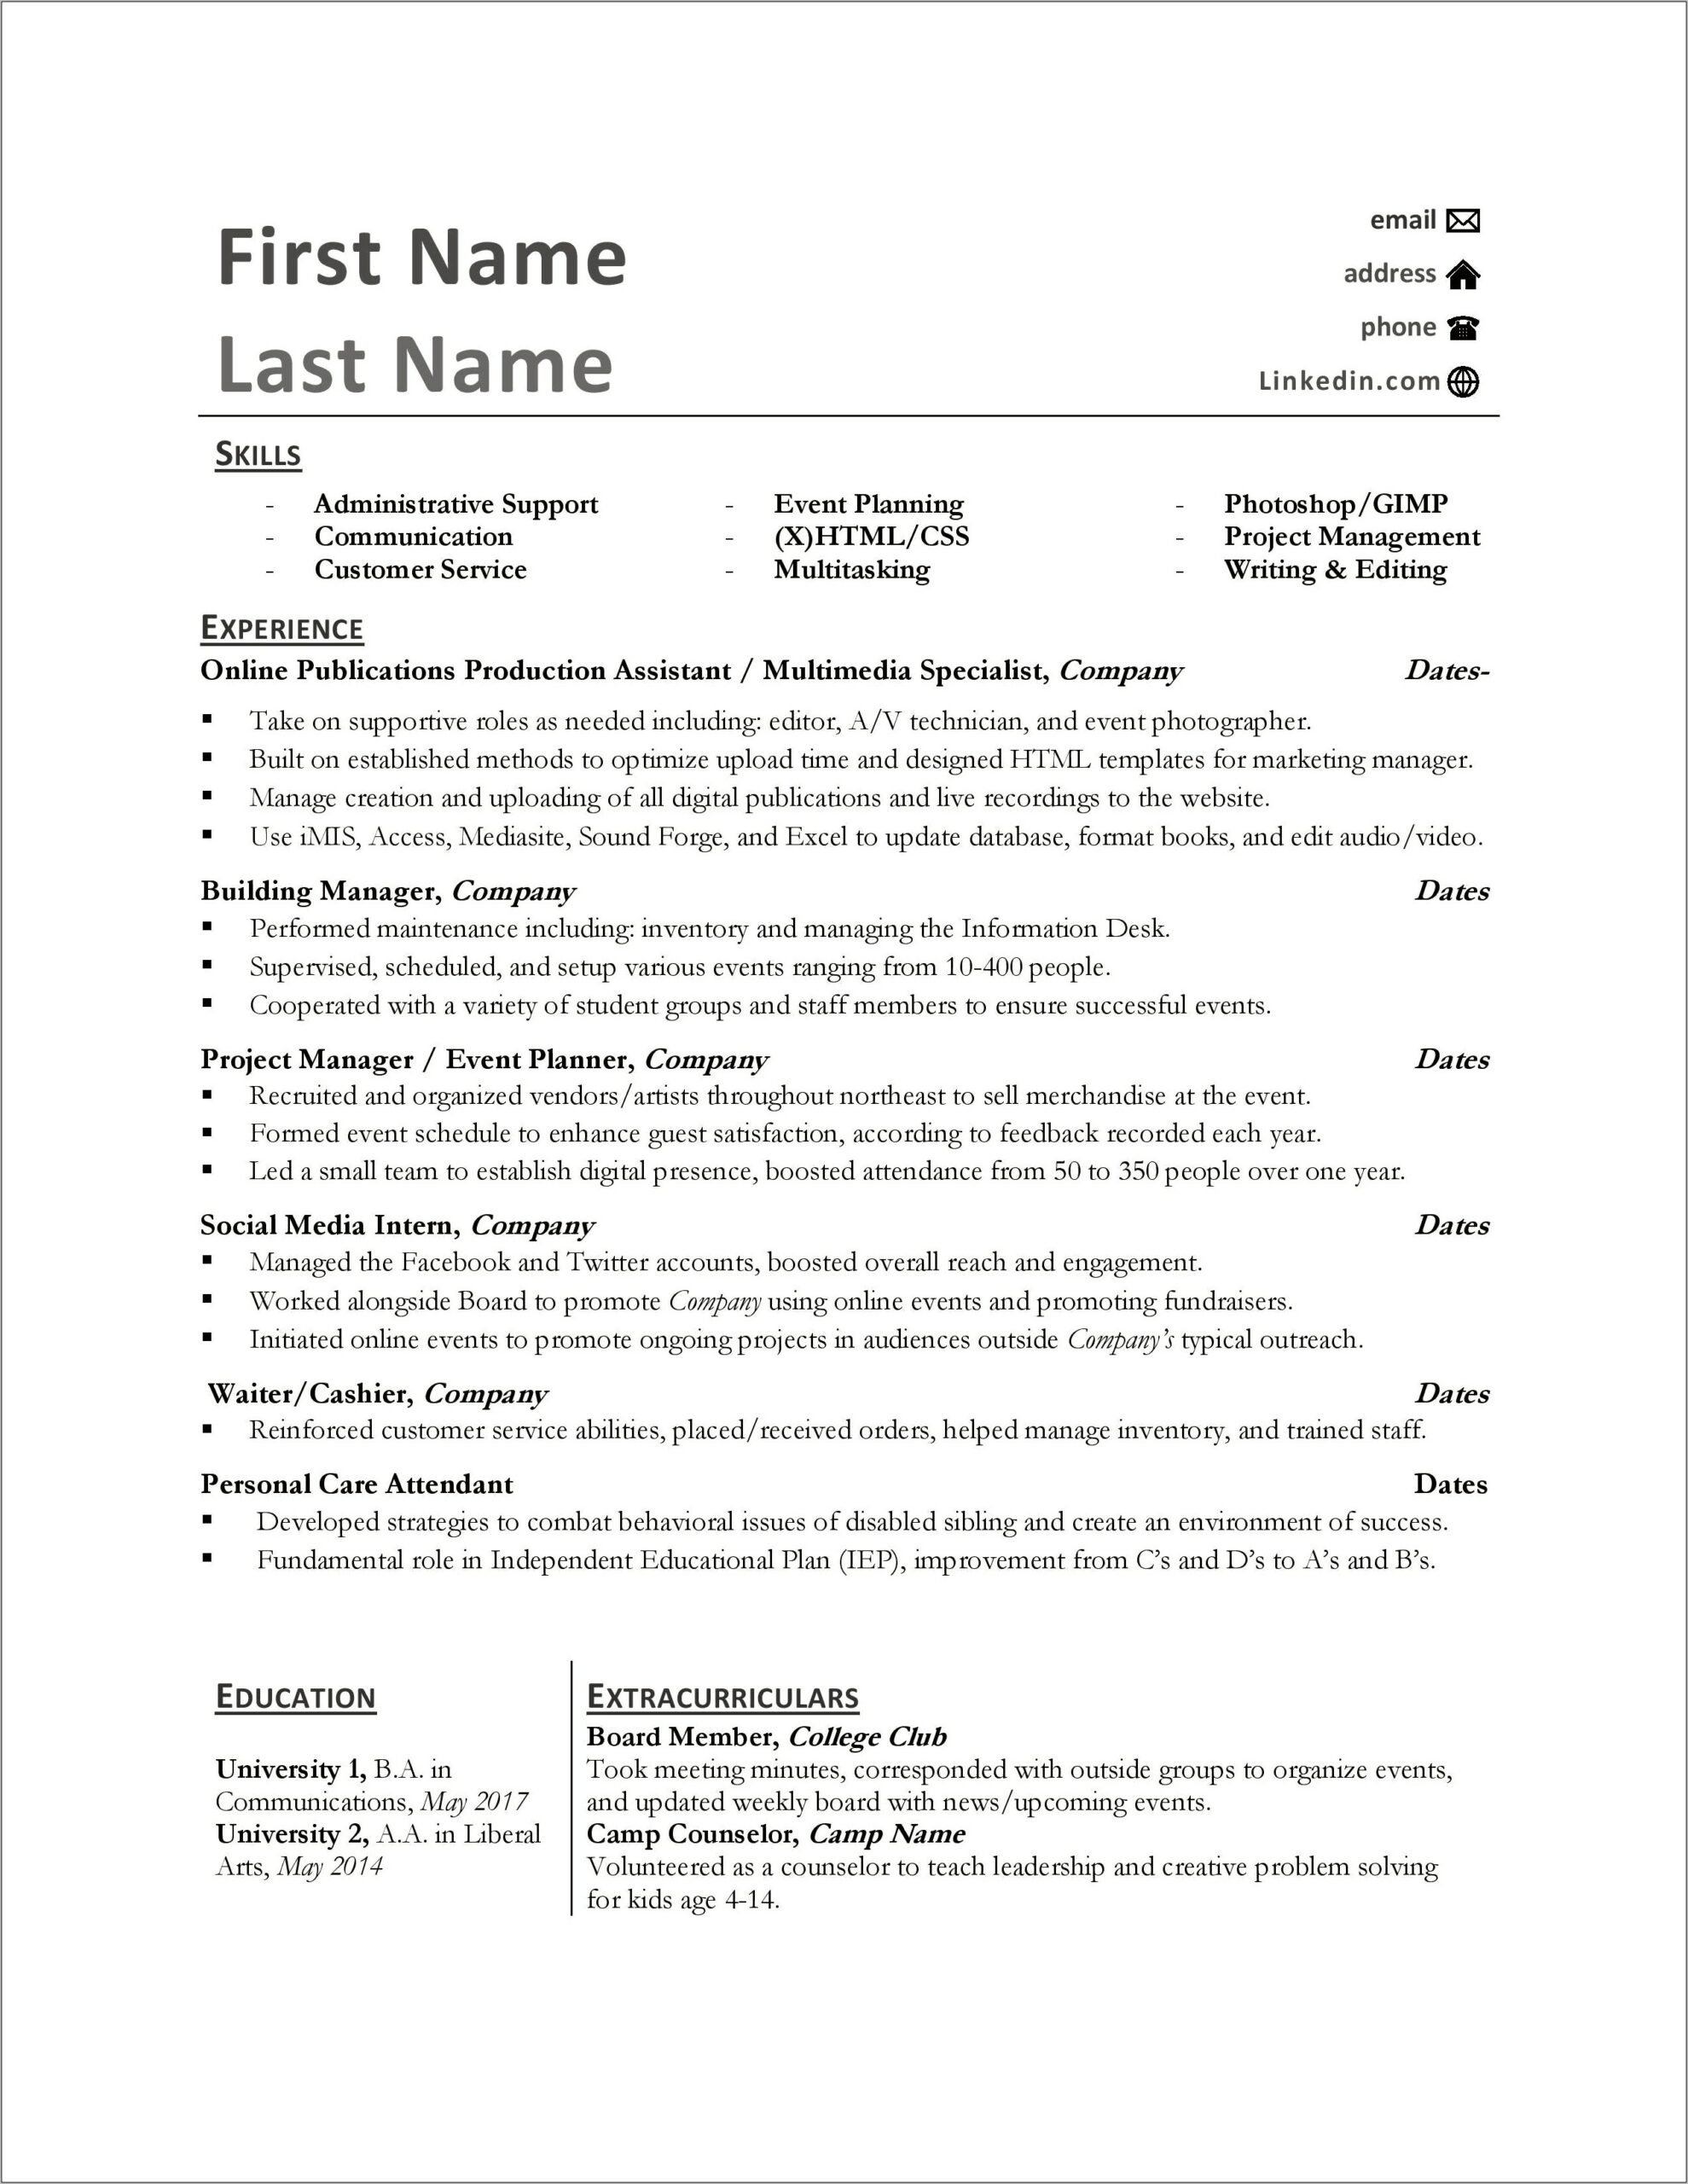 Multiple Positions At One Company Sample Resume